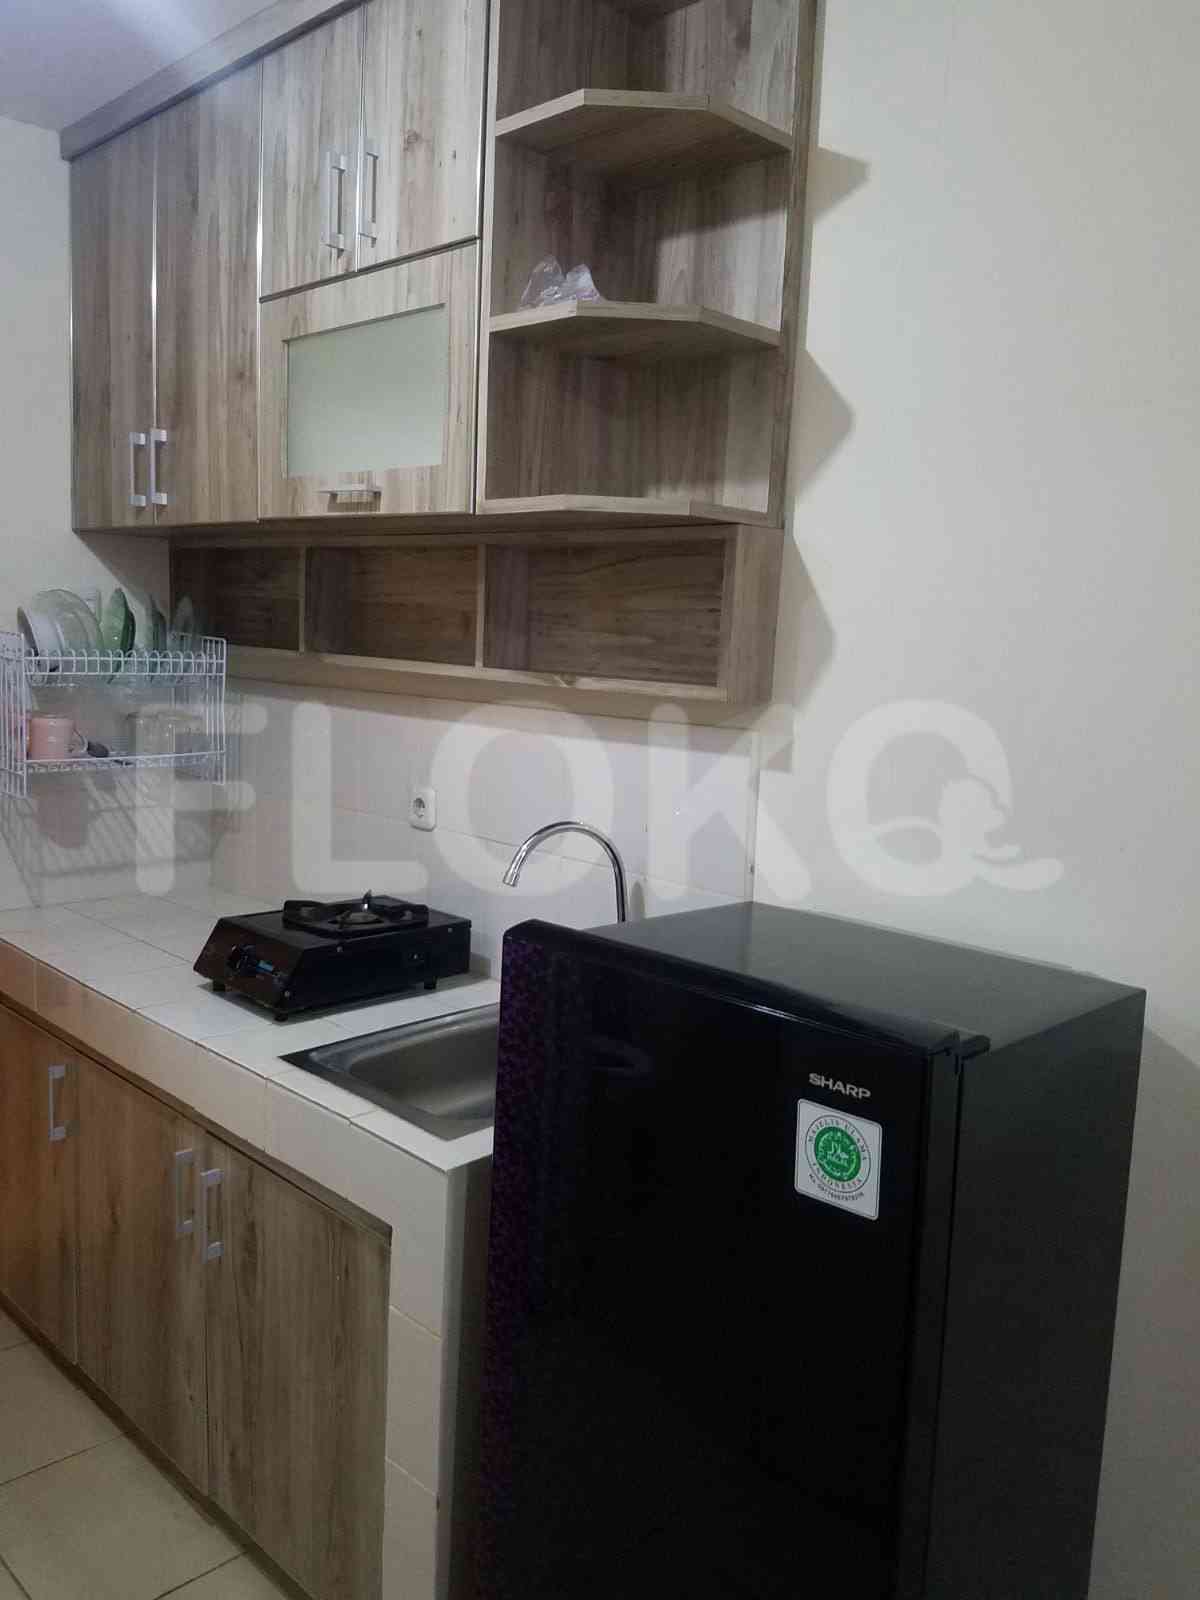 1 Bedroom on 8th Floor for Rent in The Medina Apartment - fkaf68 4